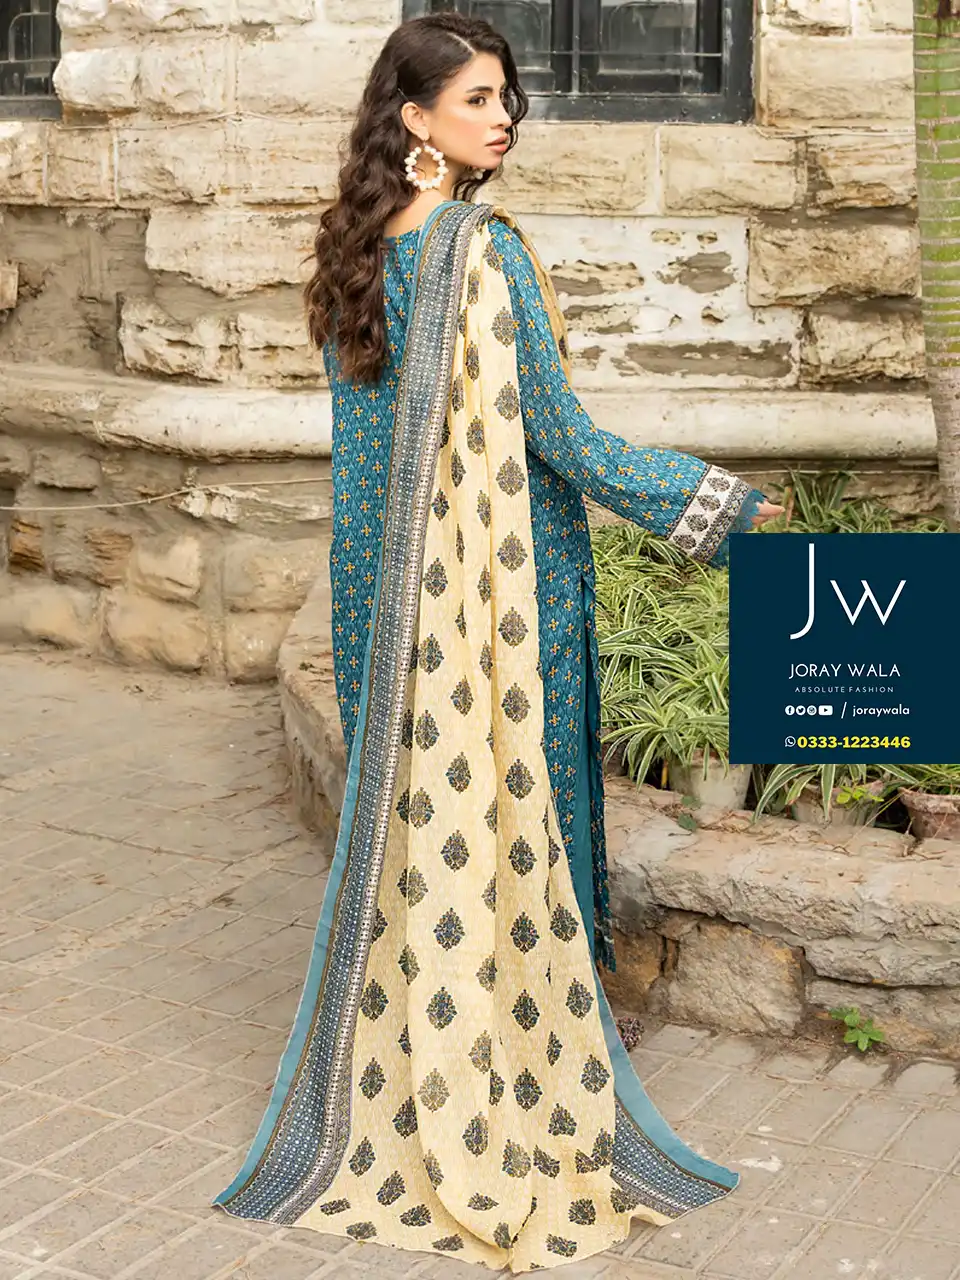 Zesh Summer Printed Lawn 2024 D6 available with free delivery at joraywala. 100% Original.